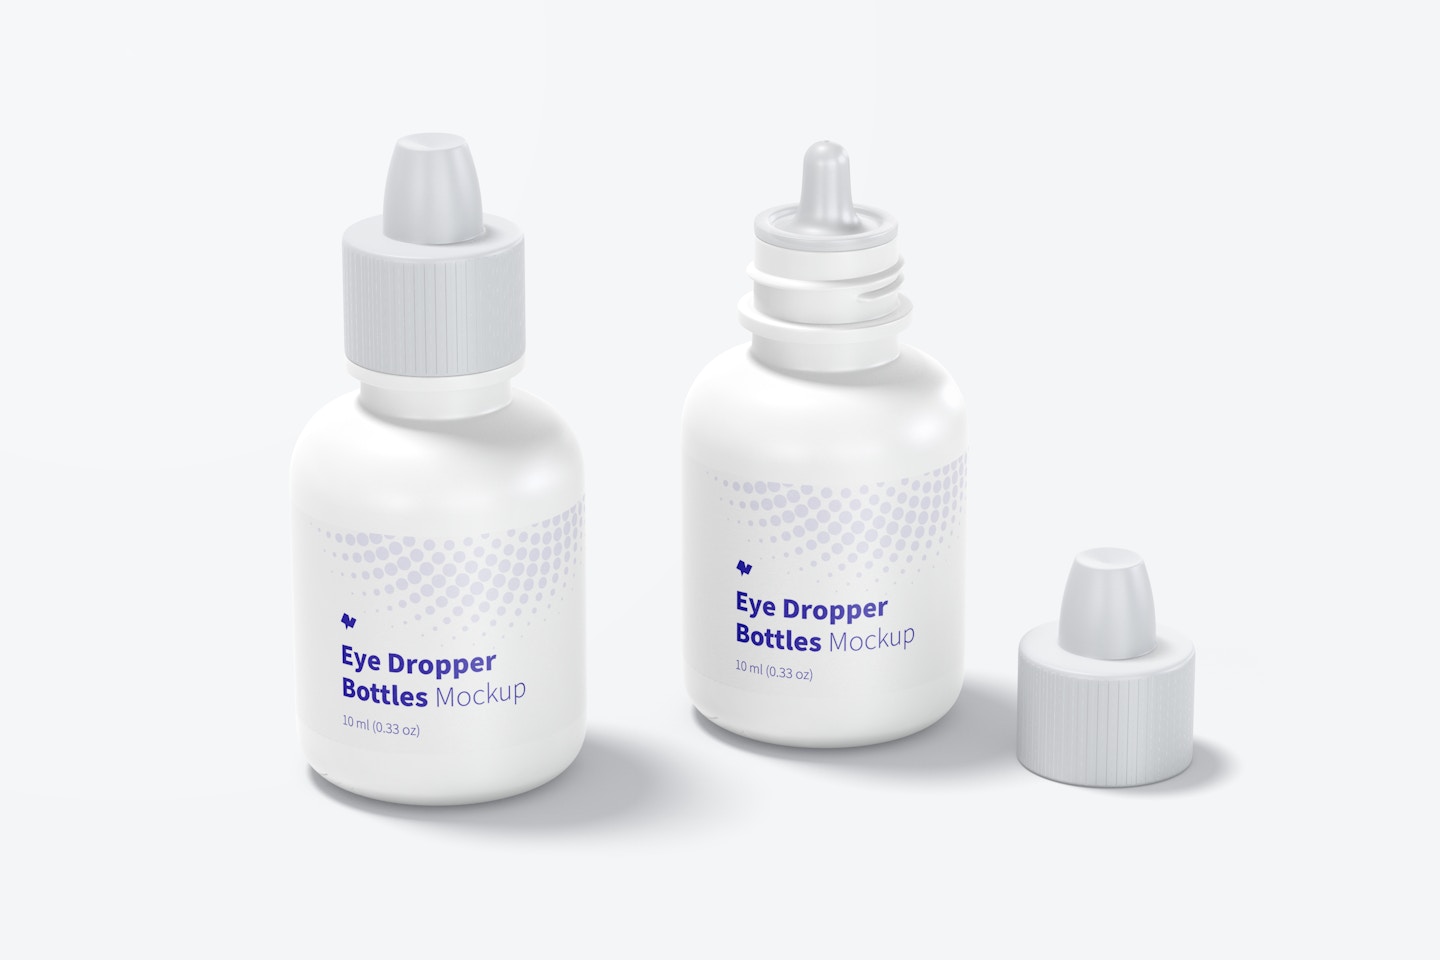 Eye Dropper Bottles Mockup, Opened and Closed